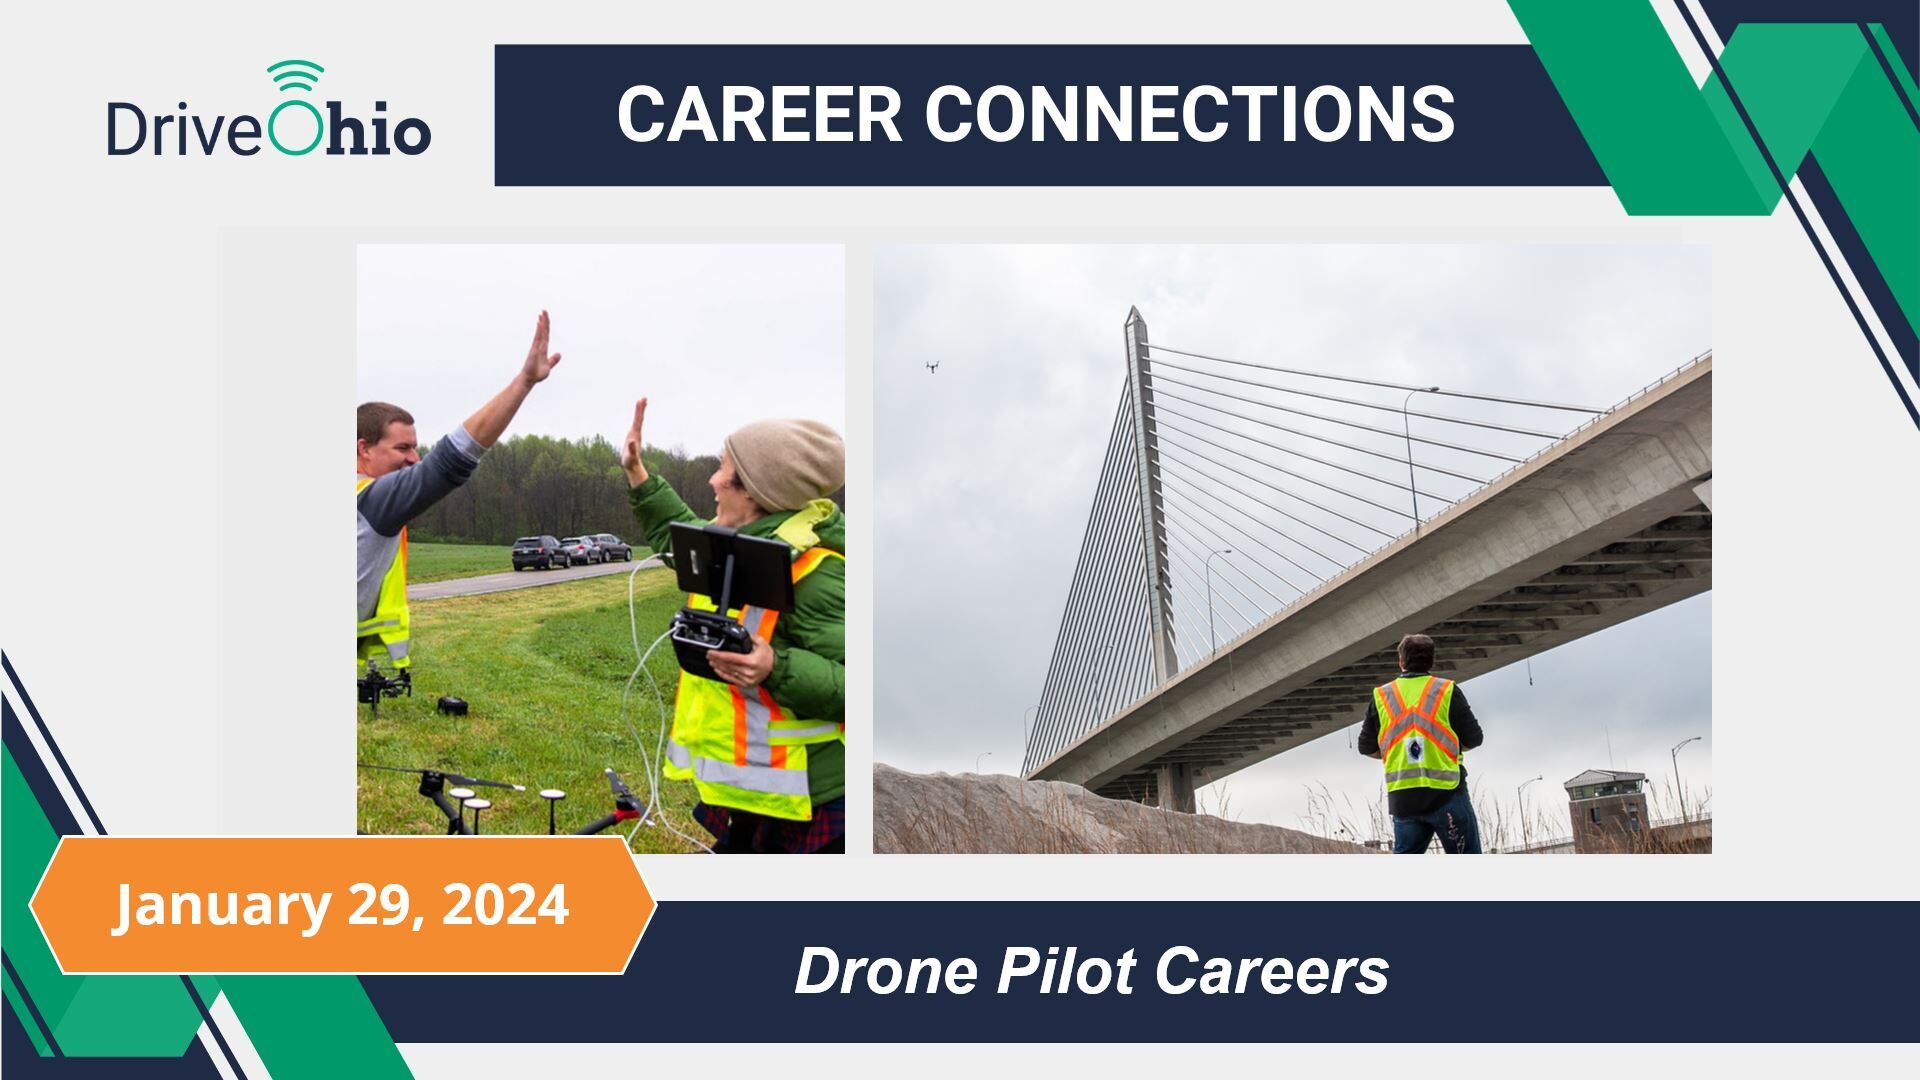 DriveOhio Career Connections Drone Pilots